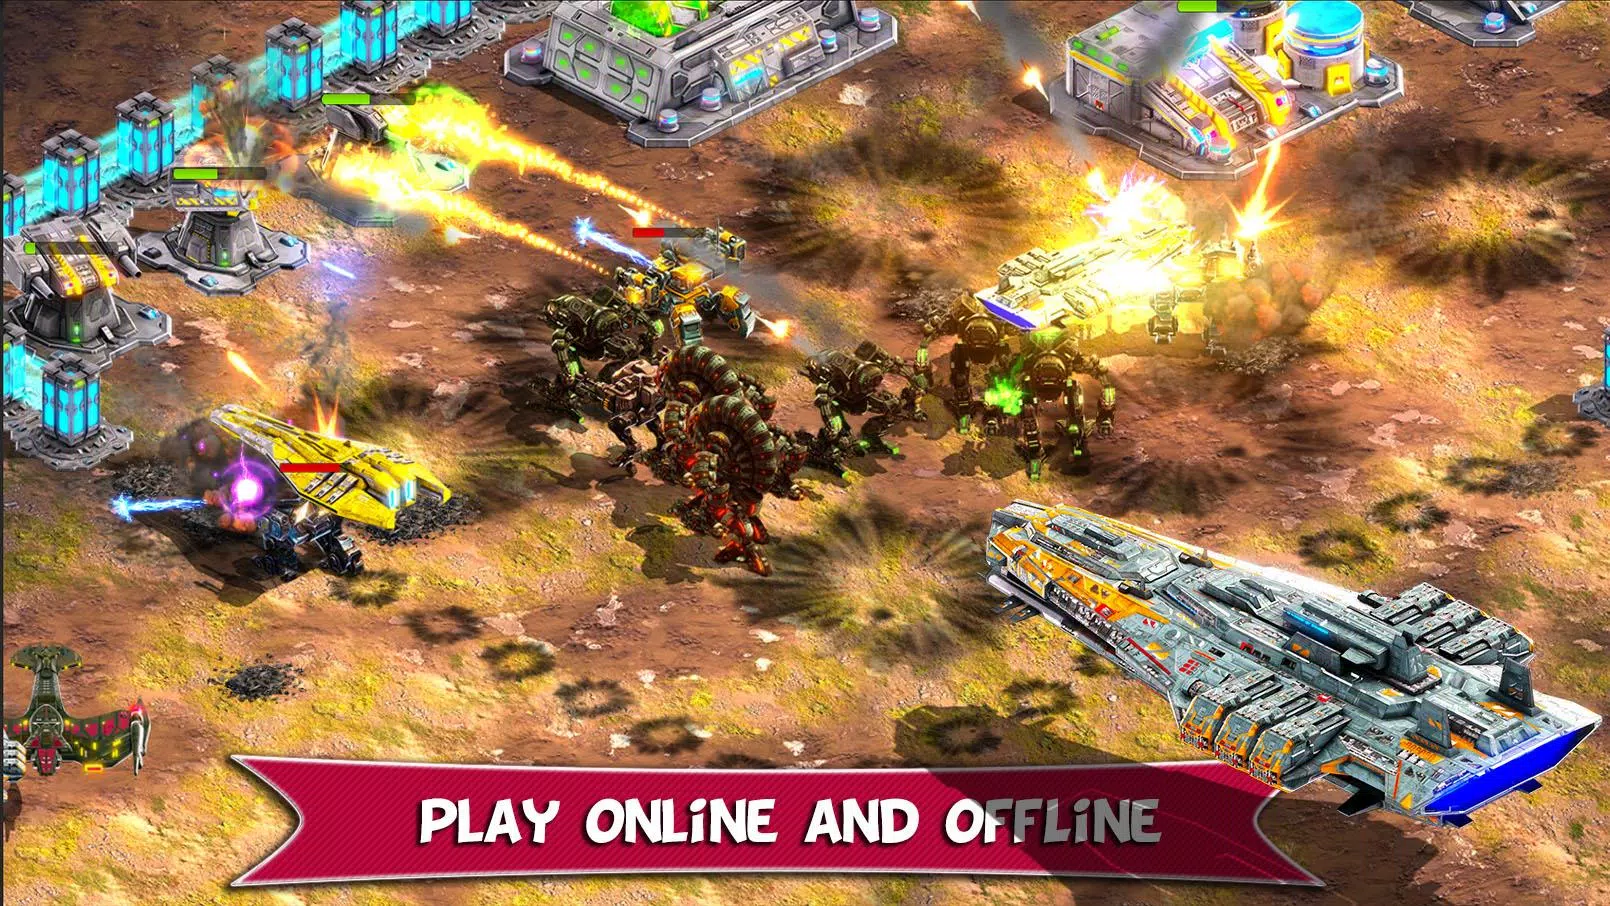 Clash of Titans APK for Android Download